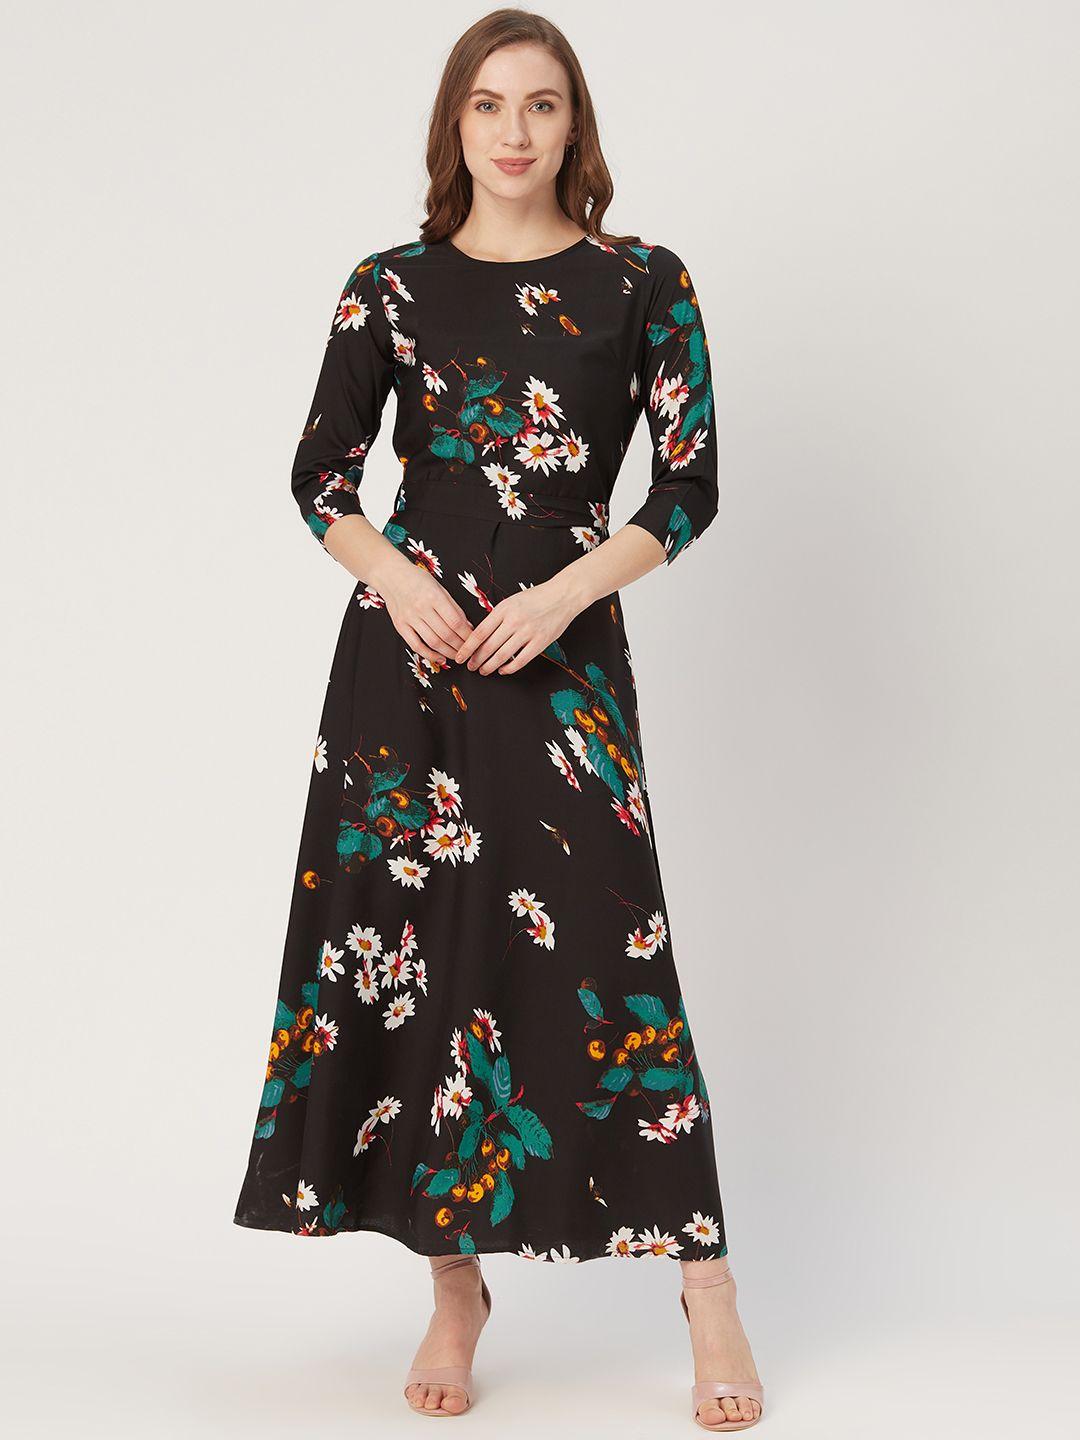 style-quotient-women-black-and-white-printed-maxi-dress